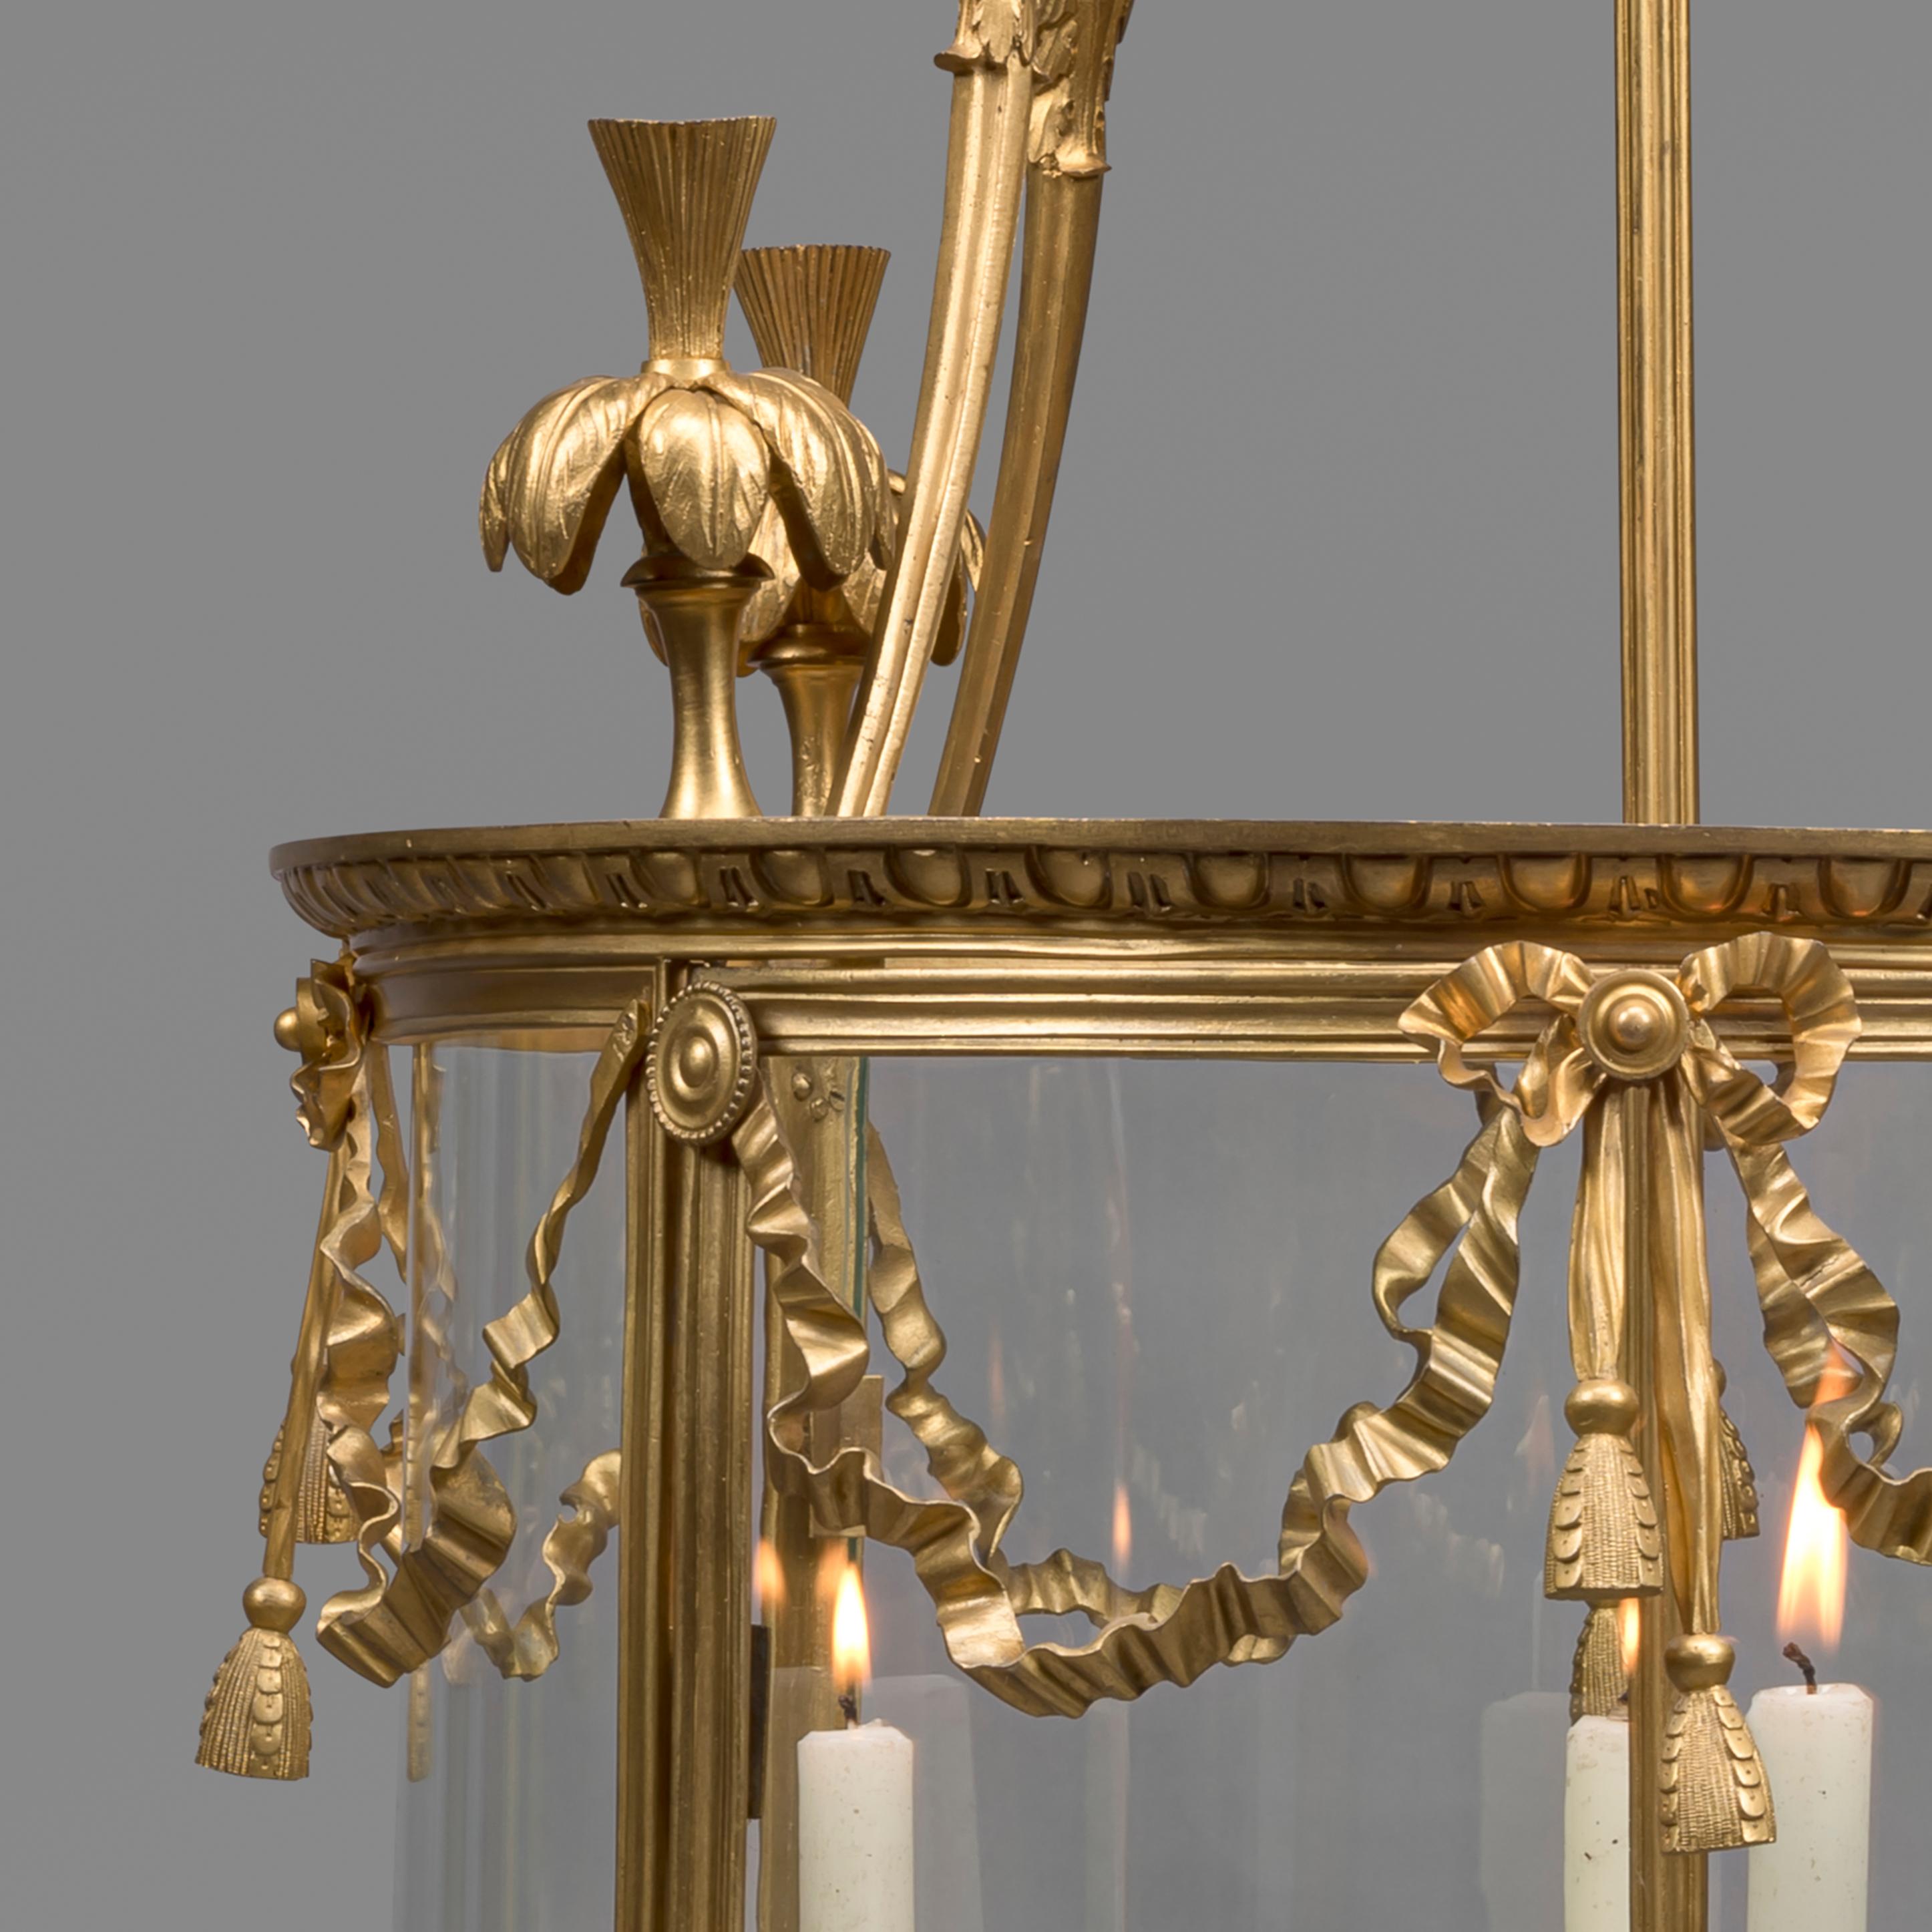 A large Louis XVI style gilt bronze cylindrical four-light lantern.

This large lantern is of cylindrical form with four ribbed uprights supporting a frame with beaded swags and ribbons and surmounted by ostrich-plume finials.

French, circa